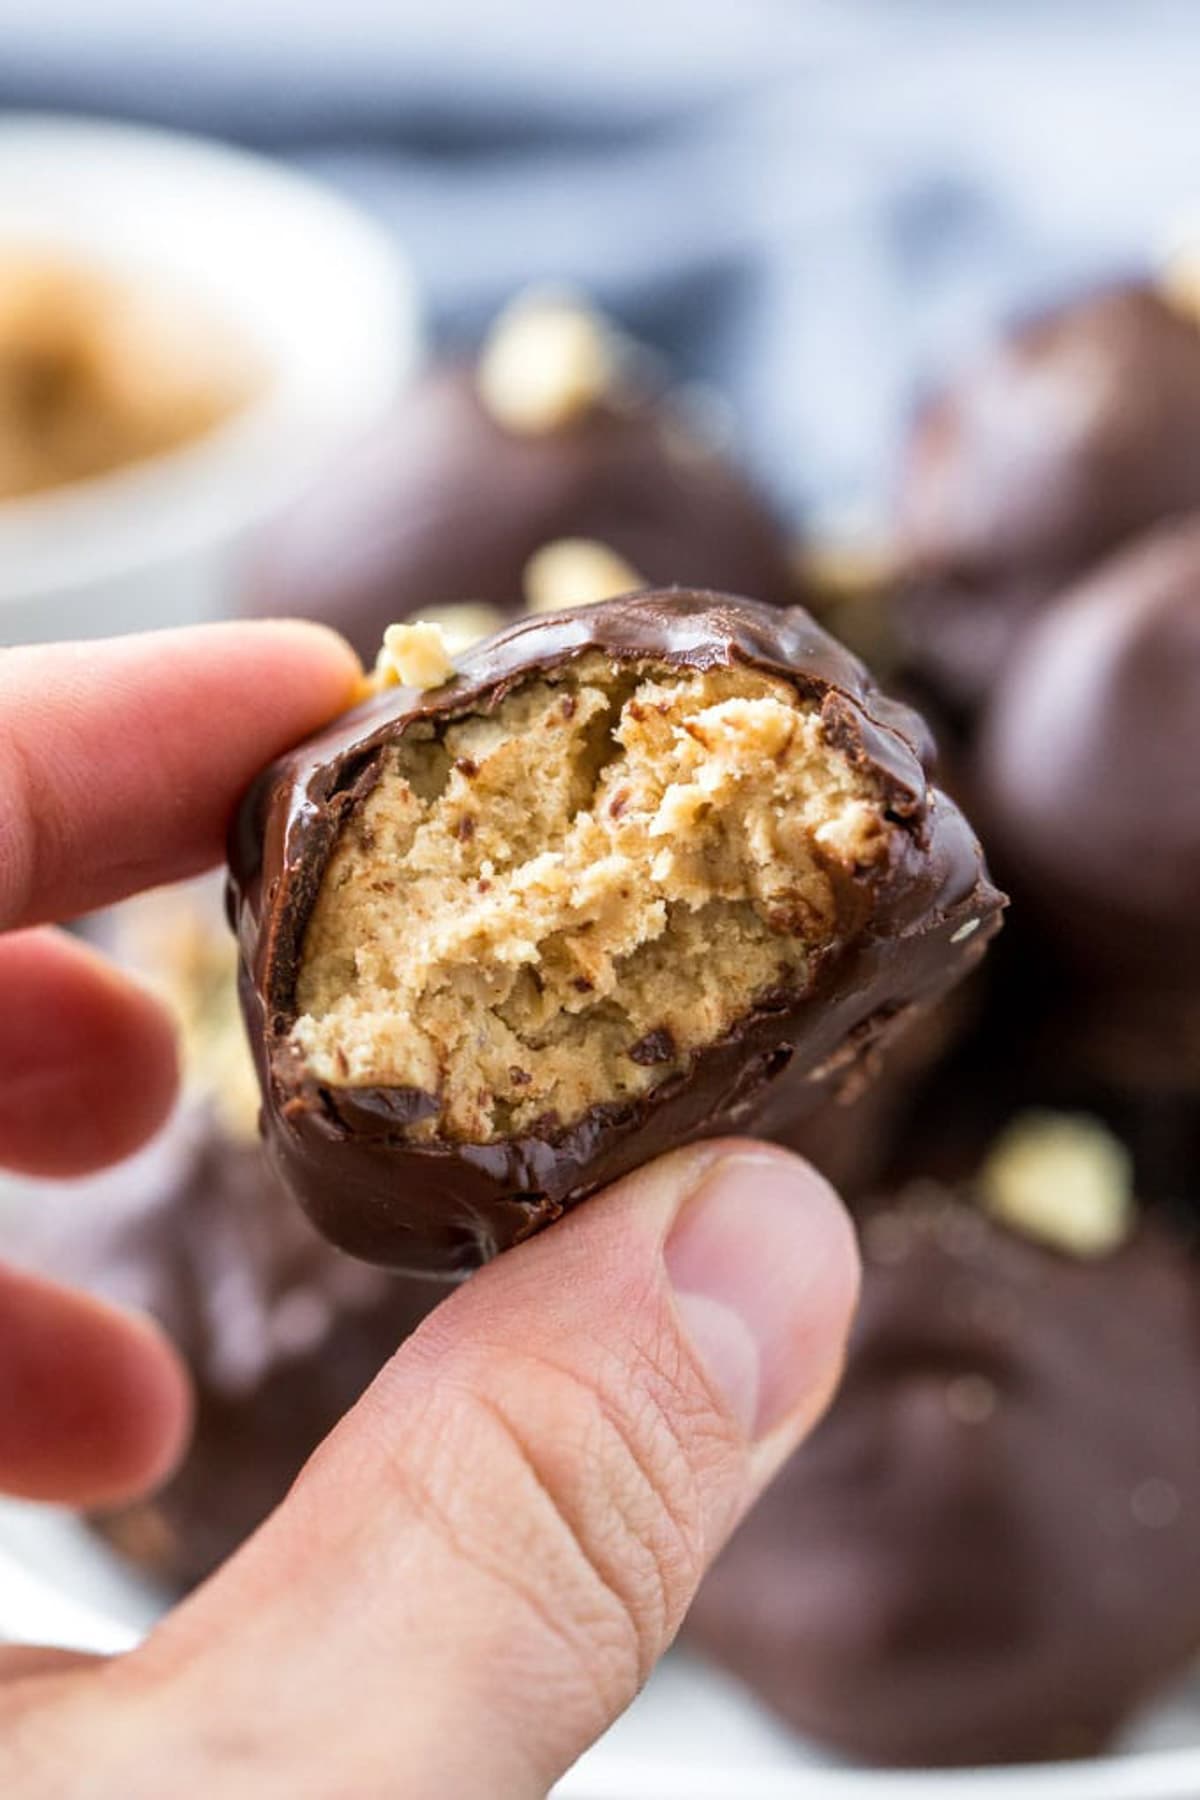 A peanut butter ball coated in chocolate and split in half to reveal the insides.